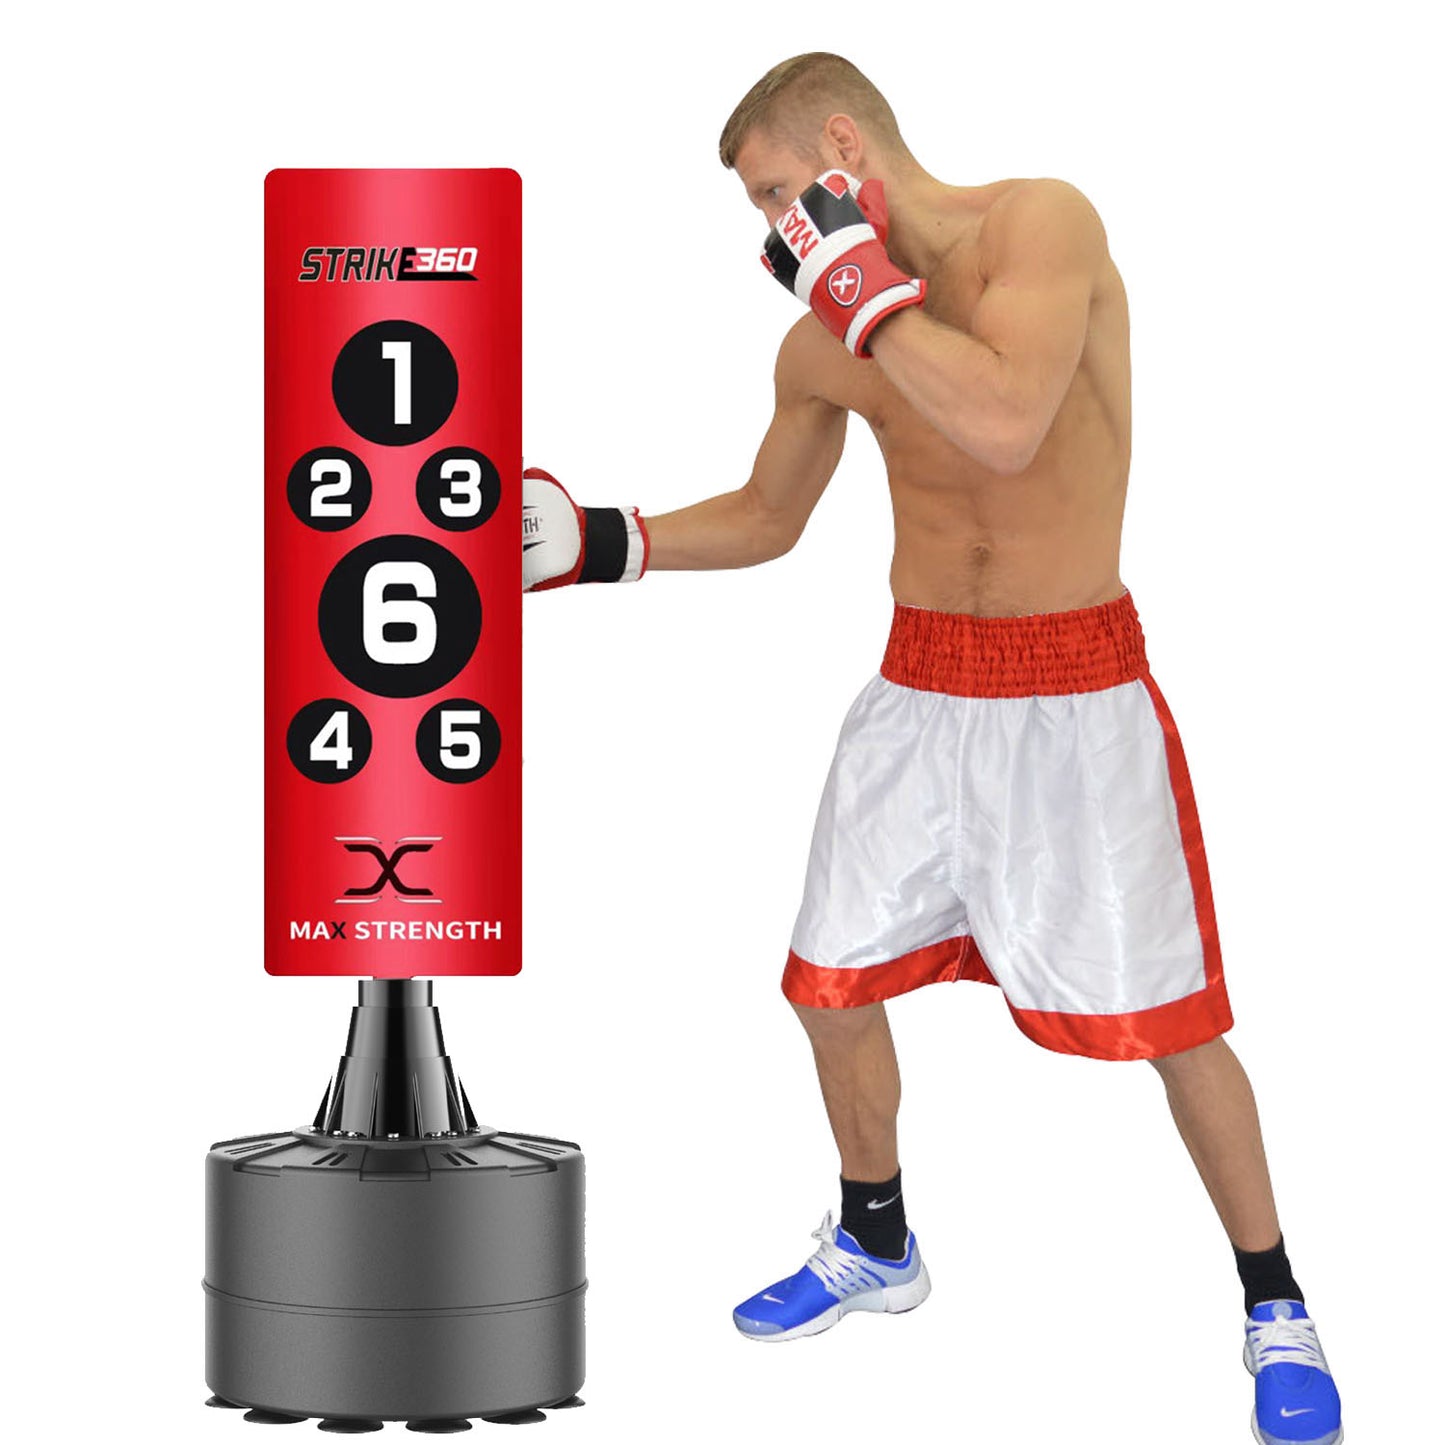 Portable standing punch bag